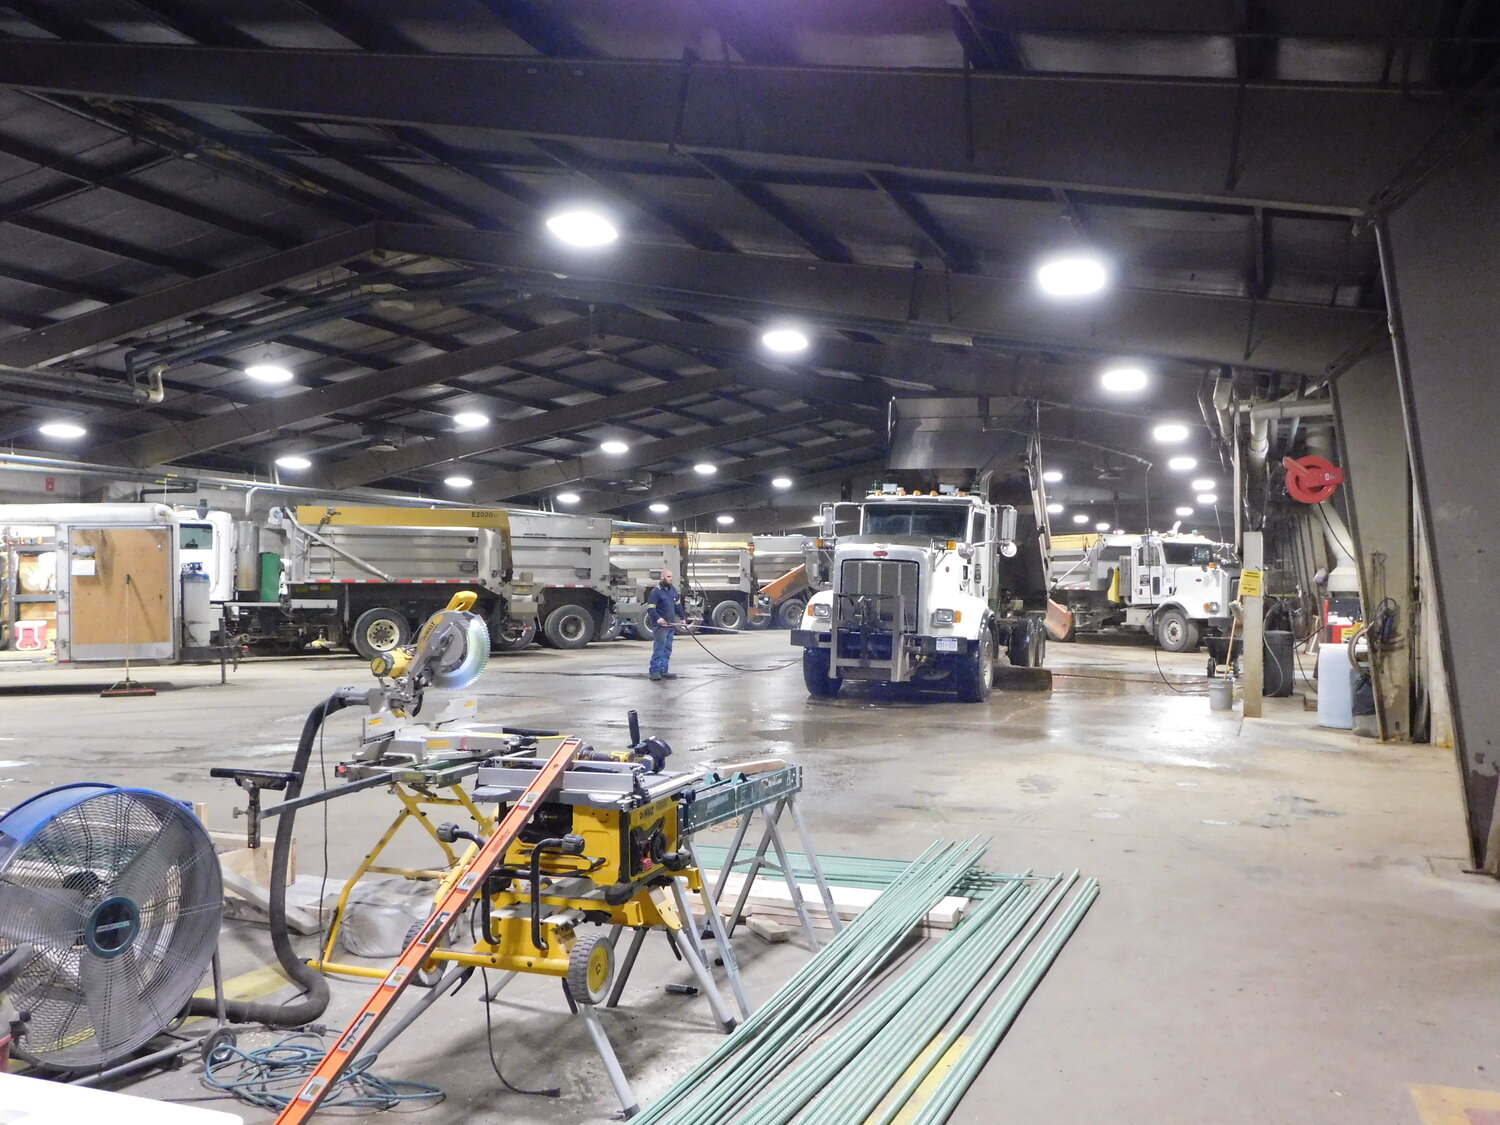 This photo shows the expansiveness of the garage which houses the CCRC trucks. At the bottom is the chop saw and reinforcing rod used in production of the precast bridge deck panels.